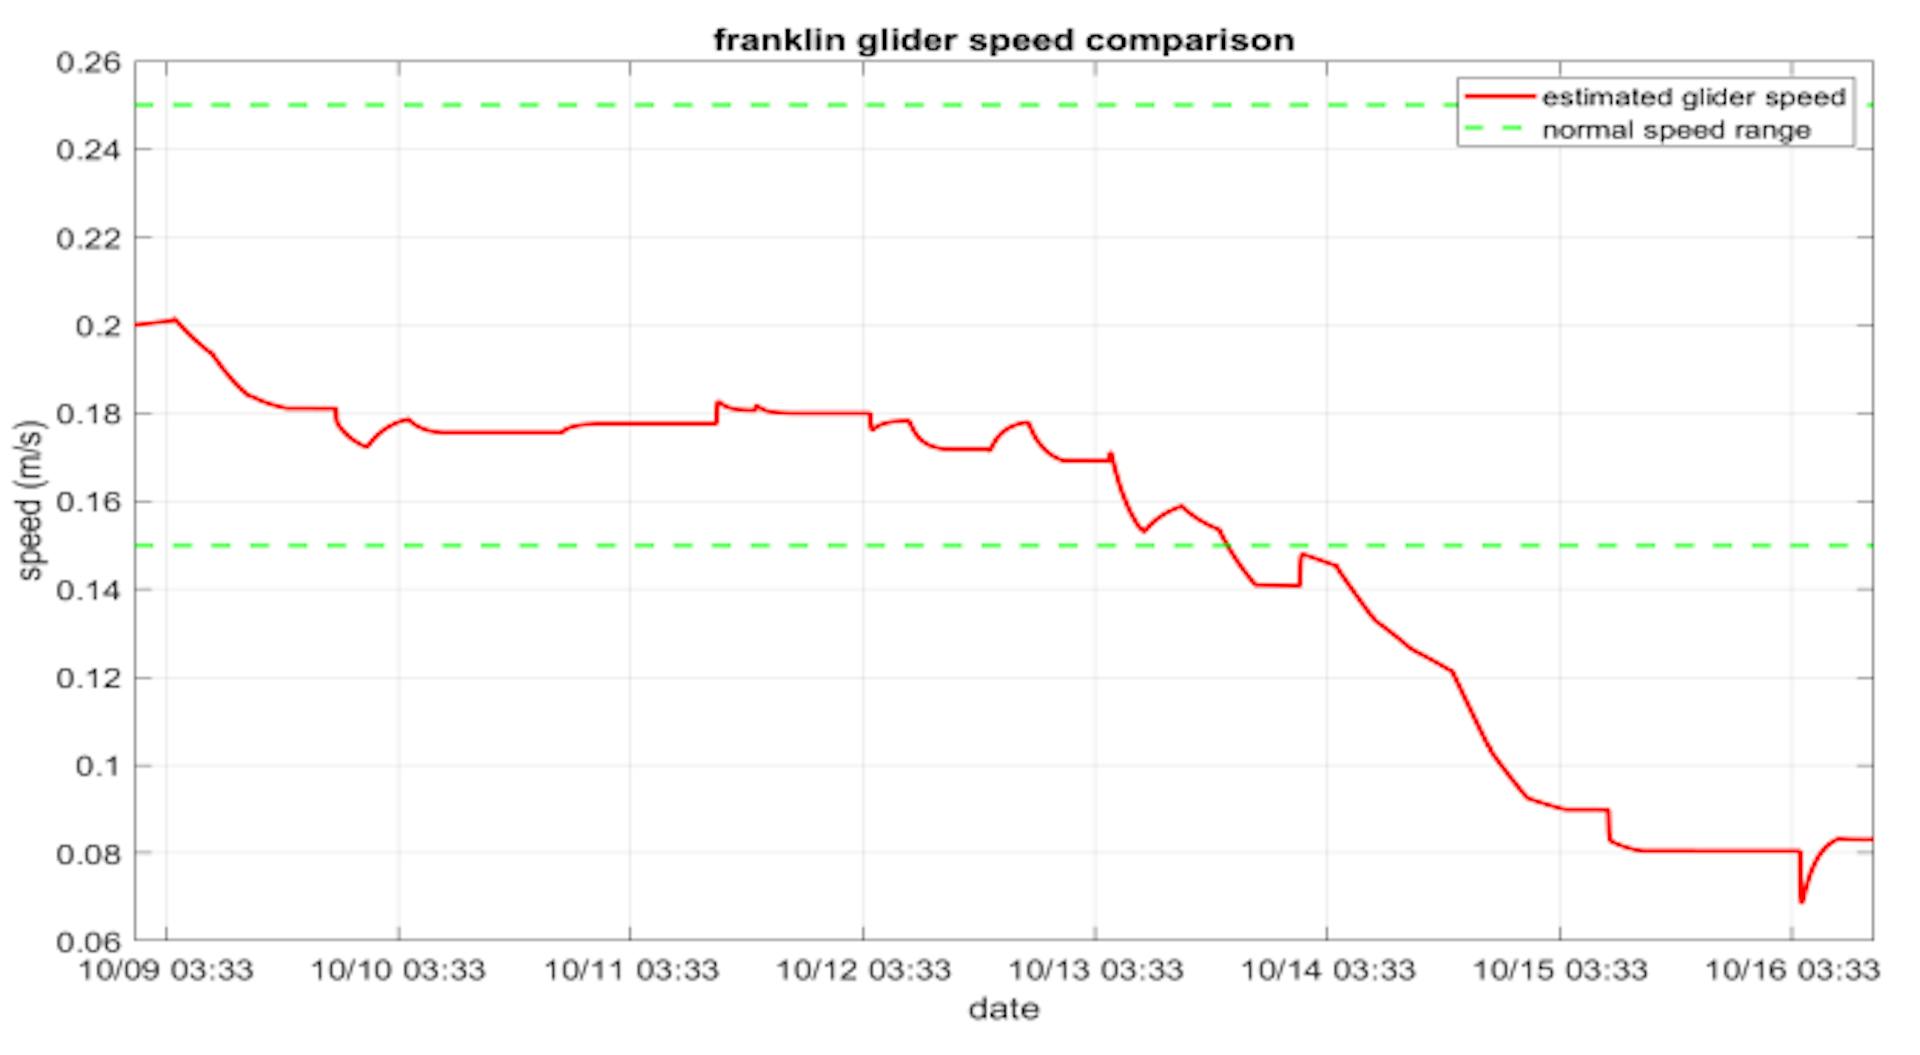 Fig. 7: Comparison of estimated glider speed (red) and normal speed range (green) for the 2022 Franklin deployment.